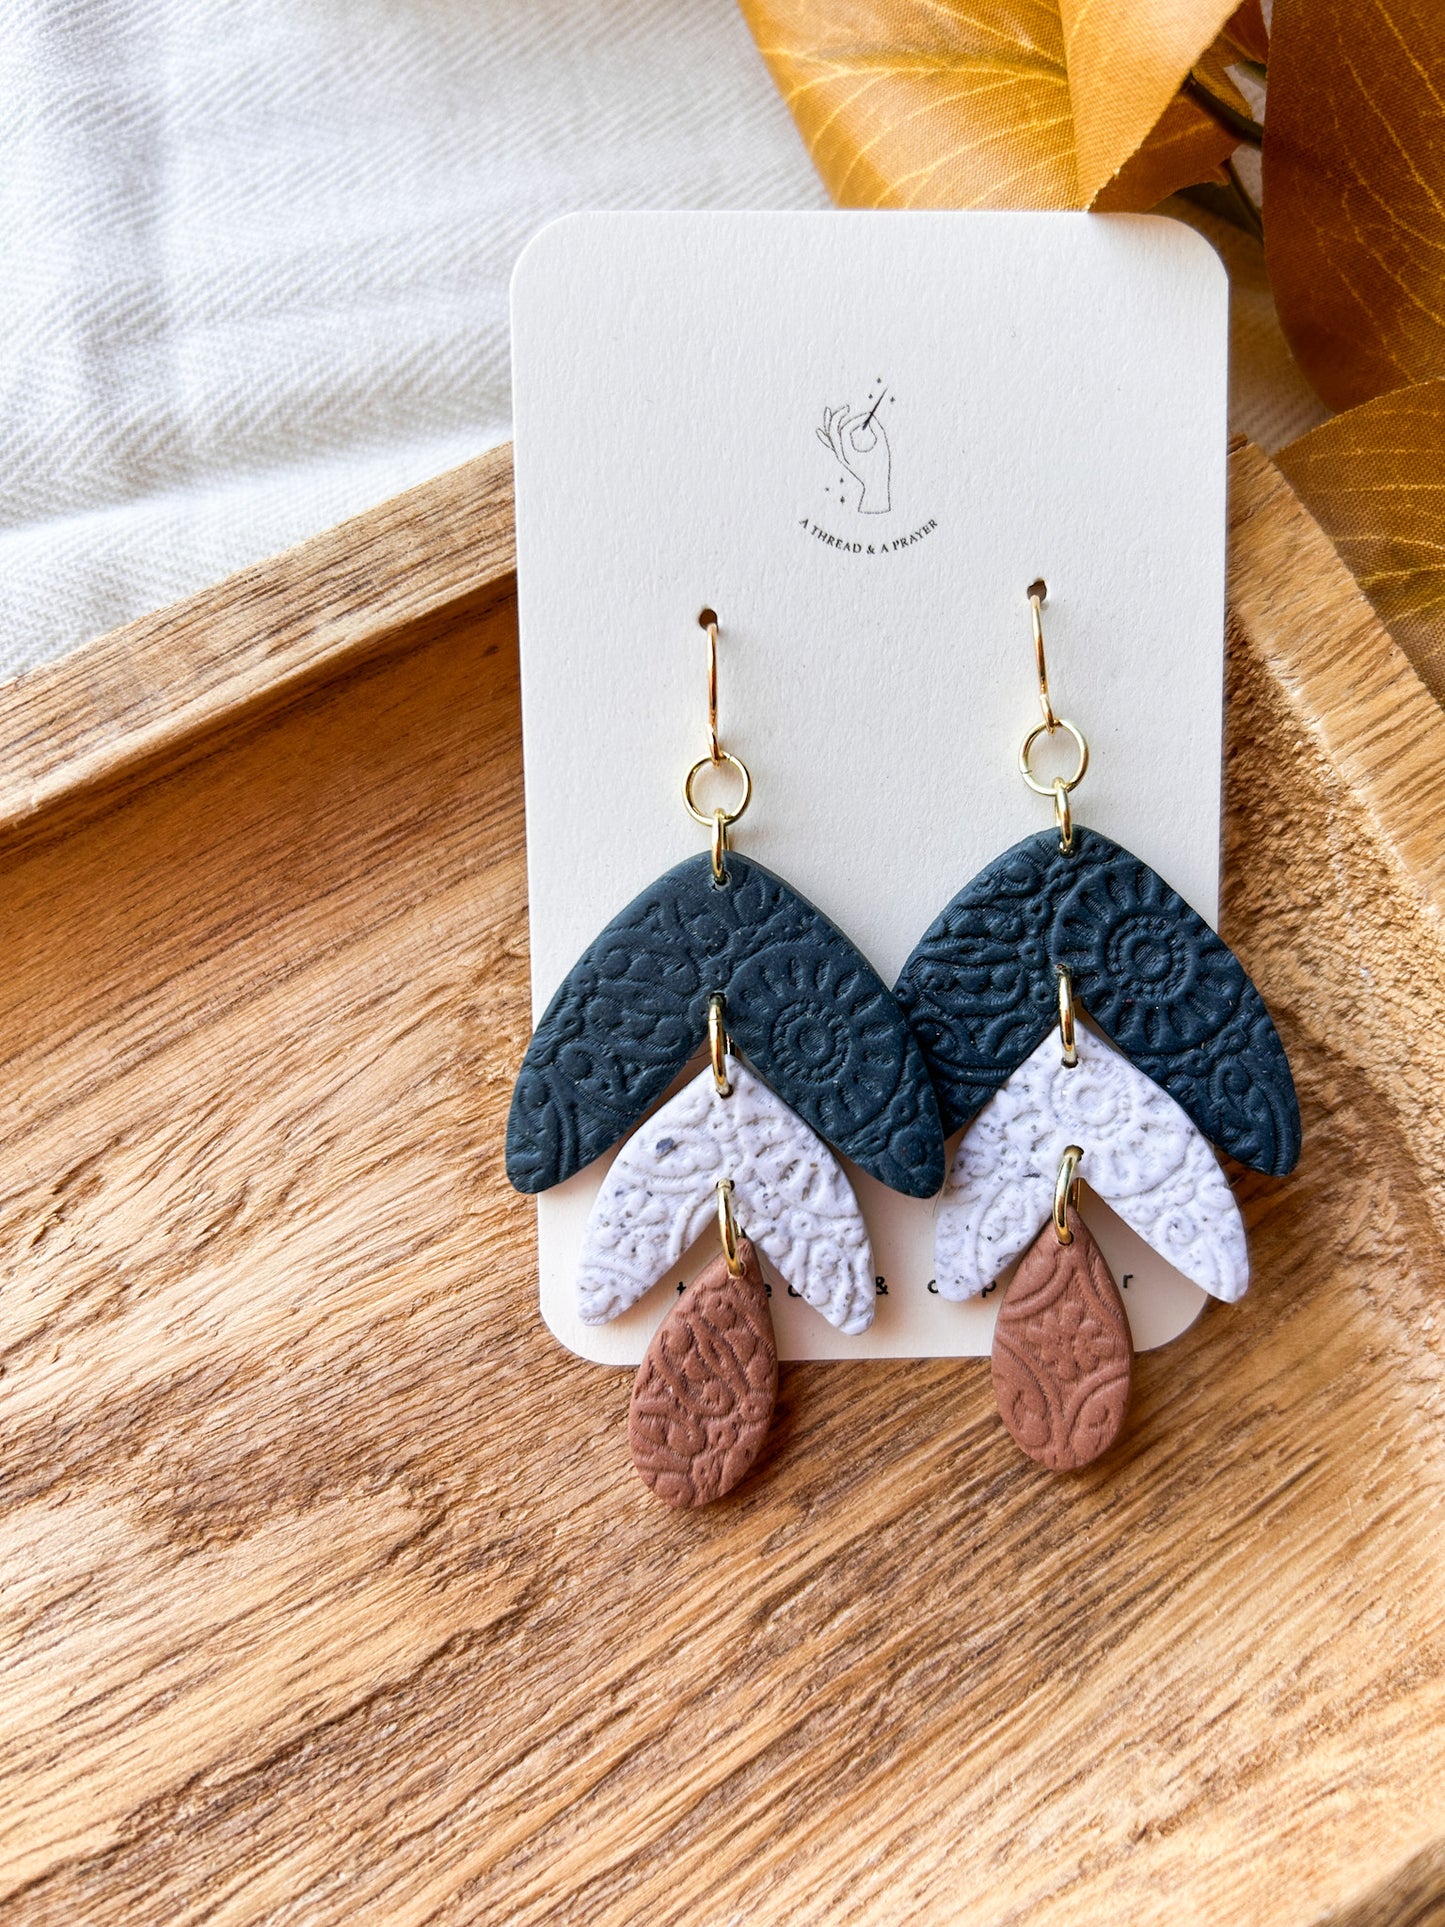 Trendy, Tiered and Textured Clay Earrings | Fall Fashion | Autumn Earrings | Statement Earrings | Lightweight